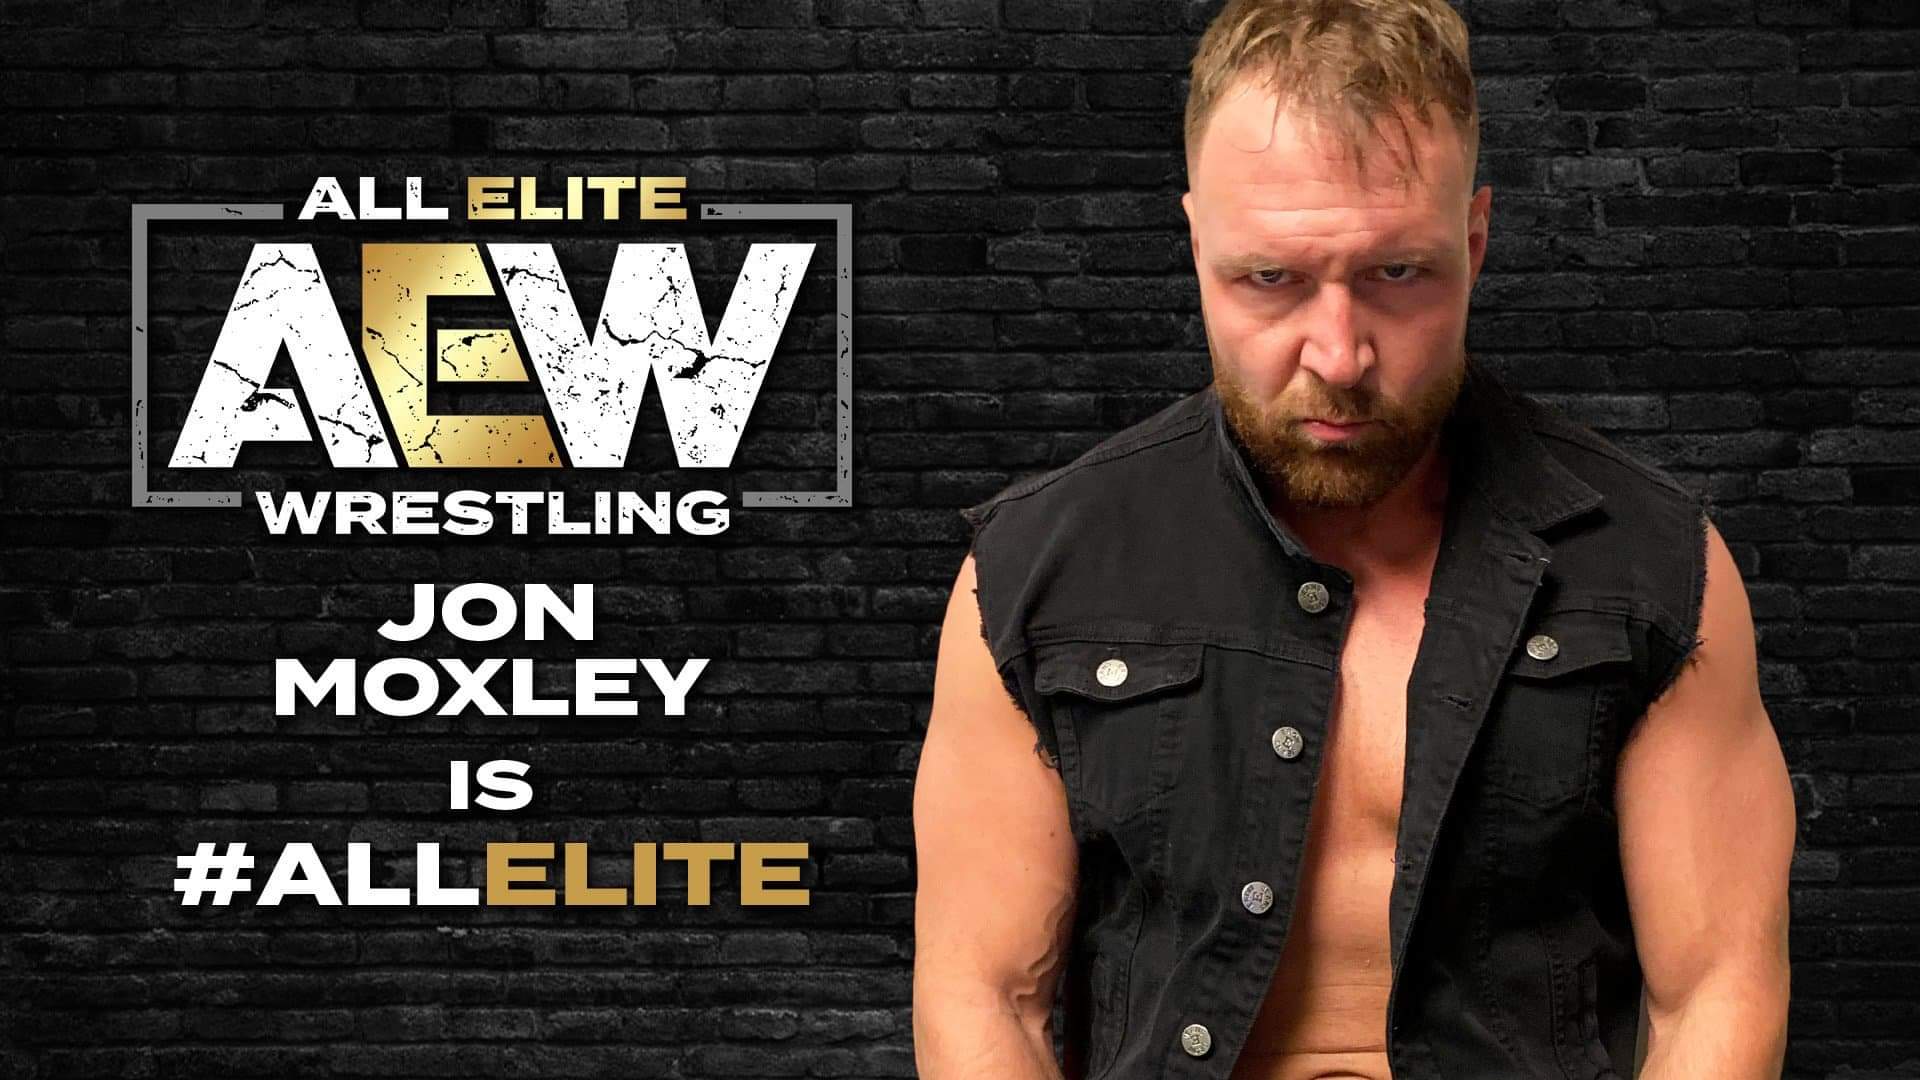 Jon Moxley signs